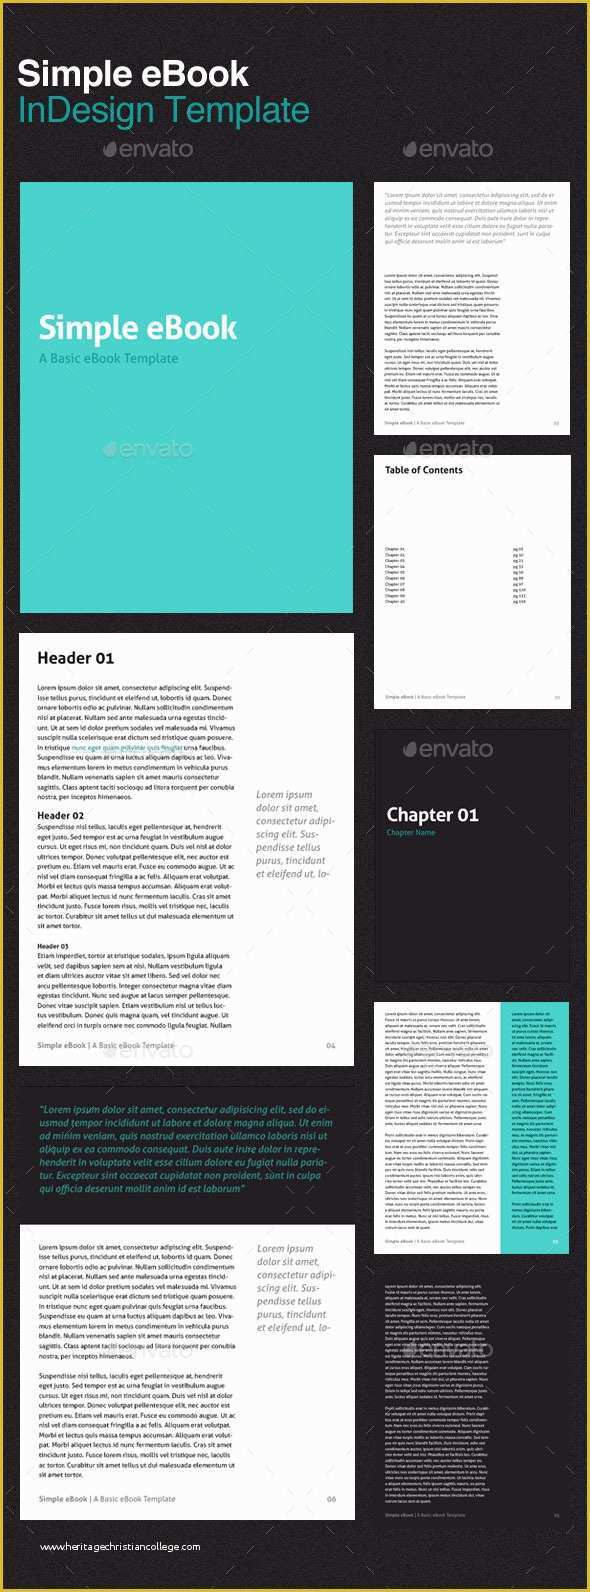 Free Ebook Templates Of Simple Ebook Template by Cardeo